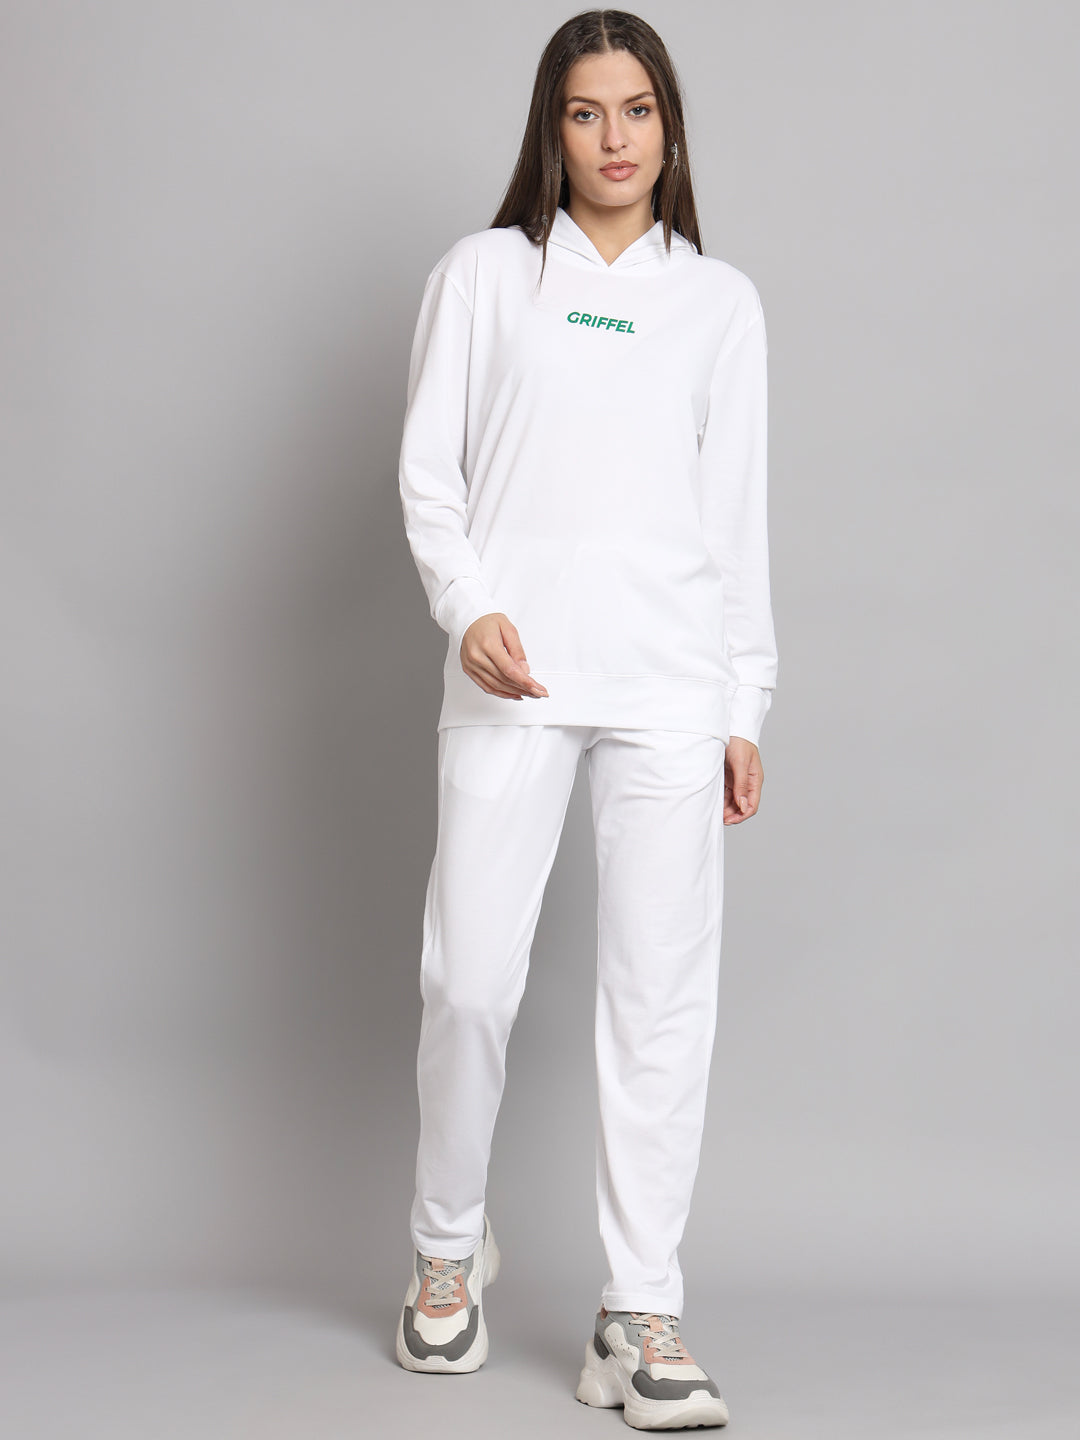 Griffel Women Solid Cotton Matty Basic Hoodie and Joggers Full set White Tracksuit